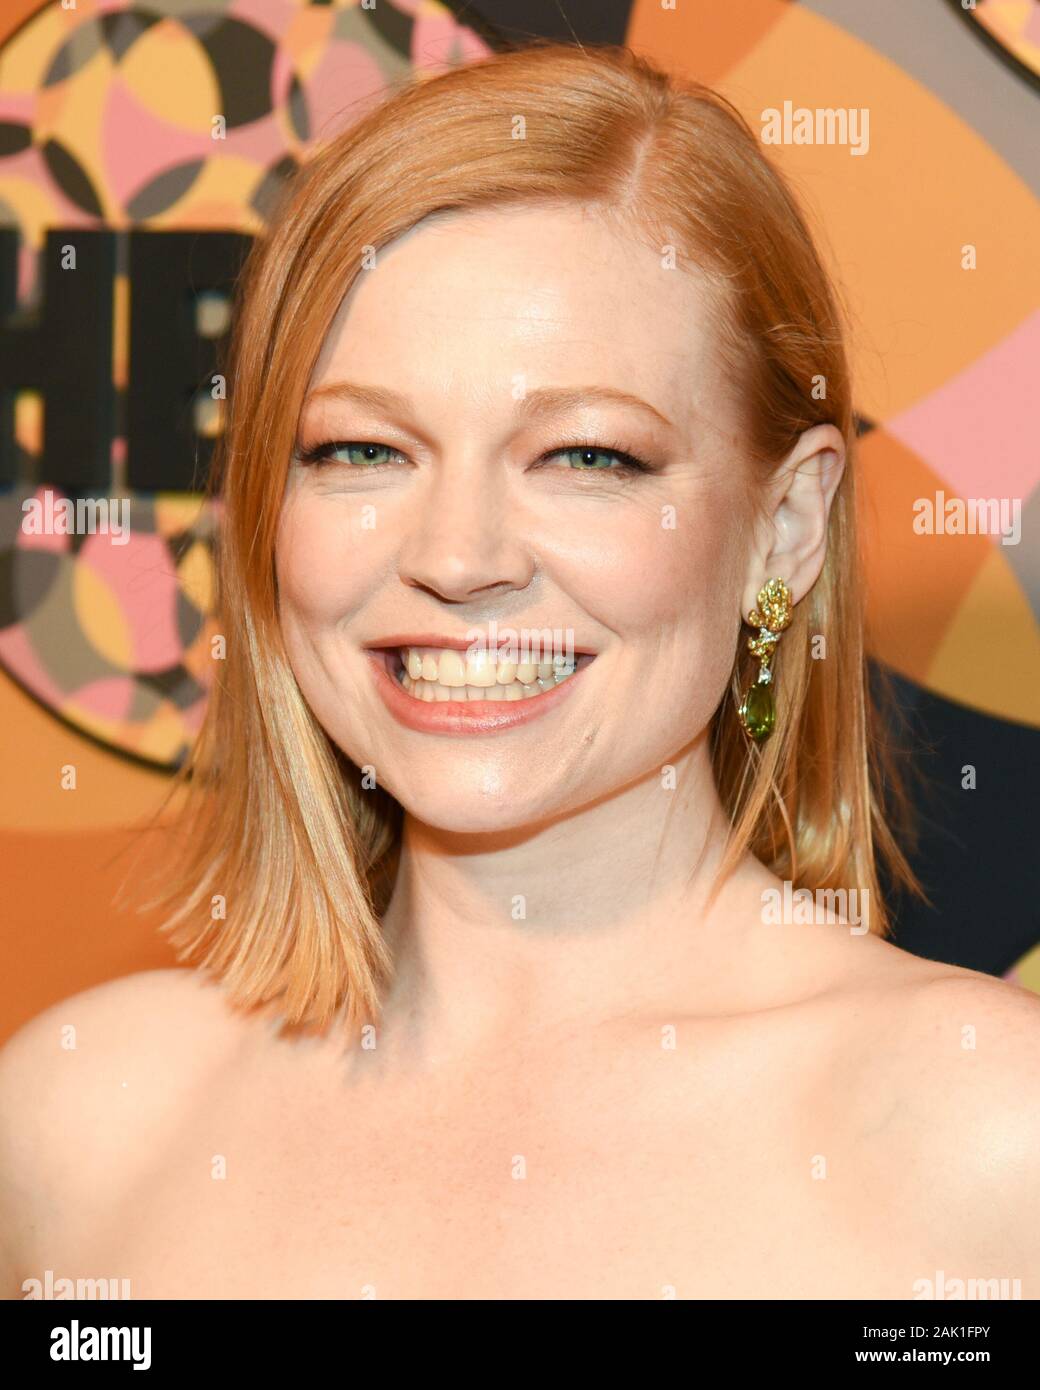 January 5, 2020, Beverly Hills, CA, USA: Sarah Snook attends the 2020 HBO Golden Globe Awards After Party held at Circa 55 Restaurant in the Beverly Hilton Hotel. (Credit Image: © Billy Bennight/ZUMA Wire) Stock Photo